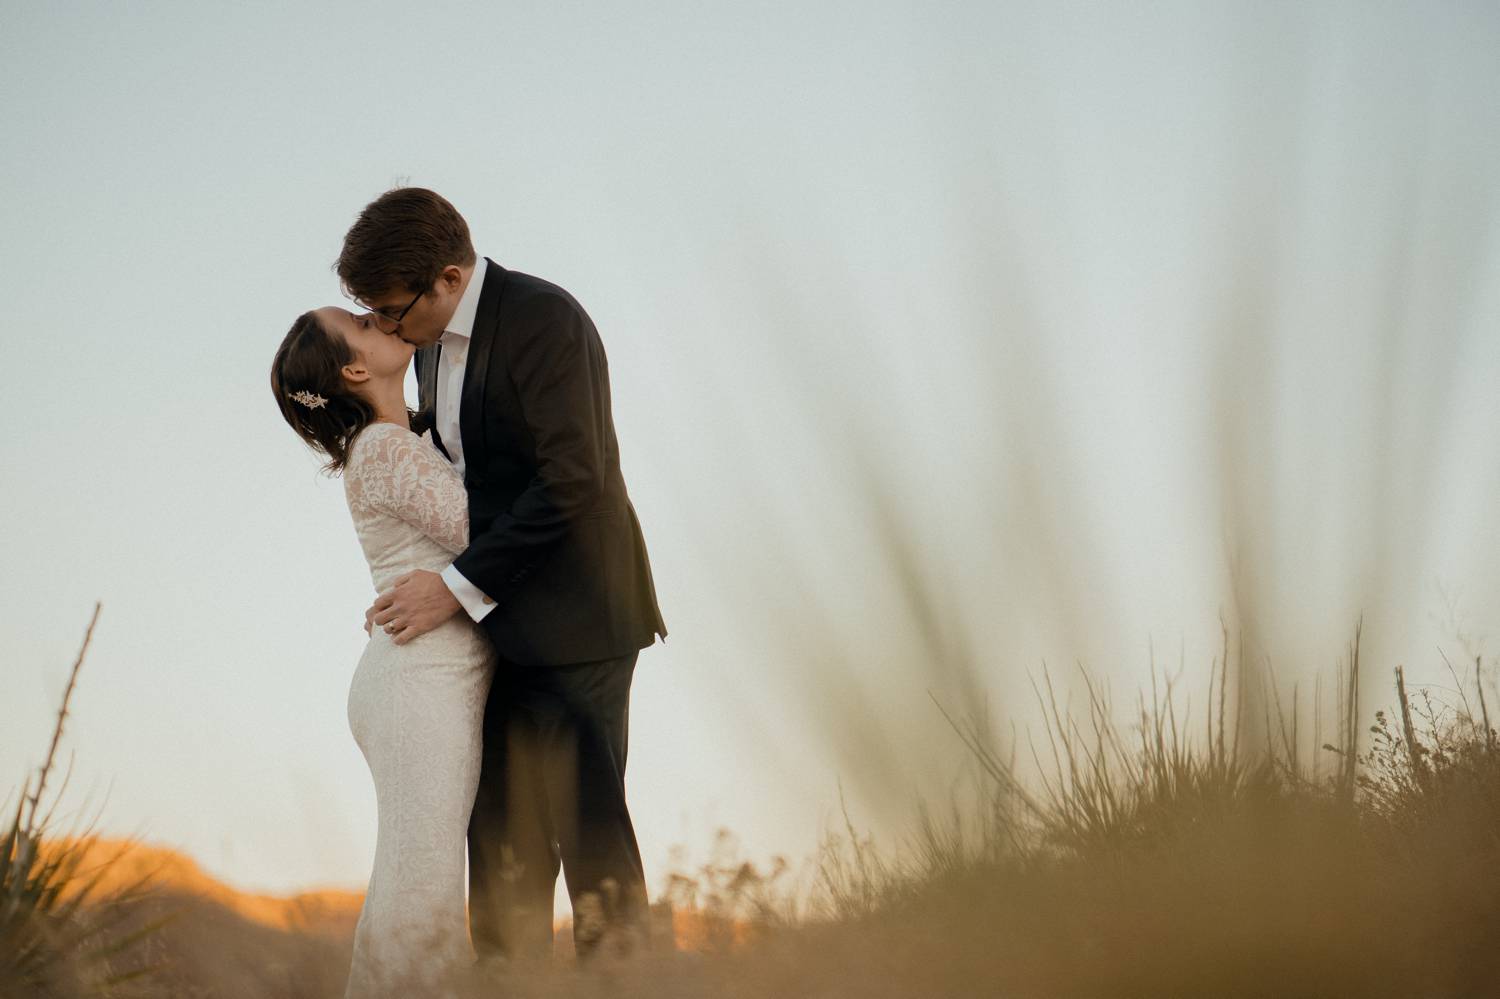 Customer Loyalty: By Nick Sparks, a bride and groom kiss at twilight in the middle of a wheat field.